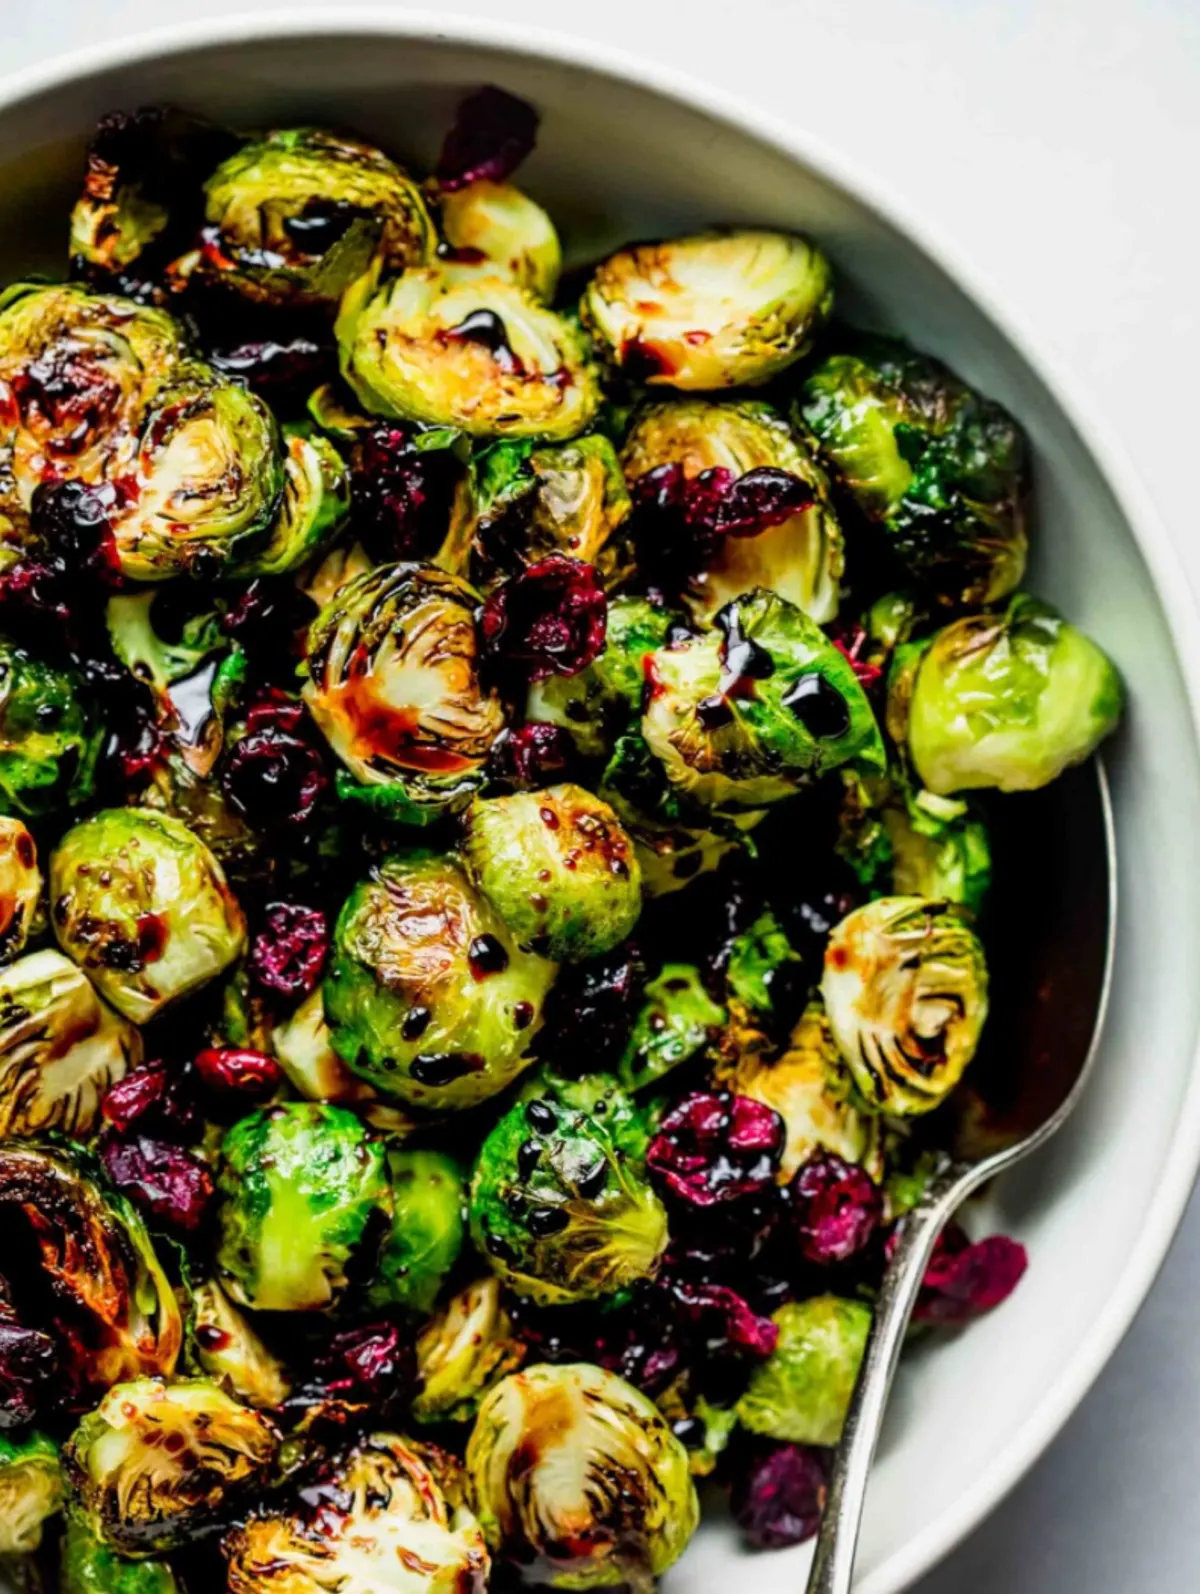 Balsamic Brussel Sprouts with Cranberries